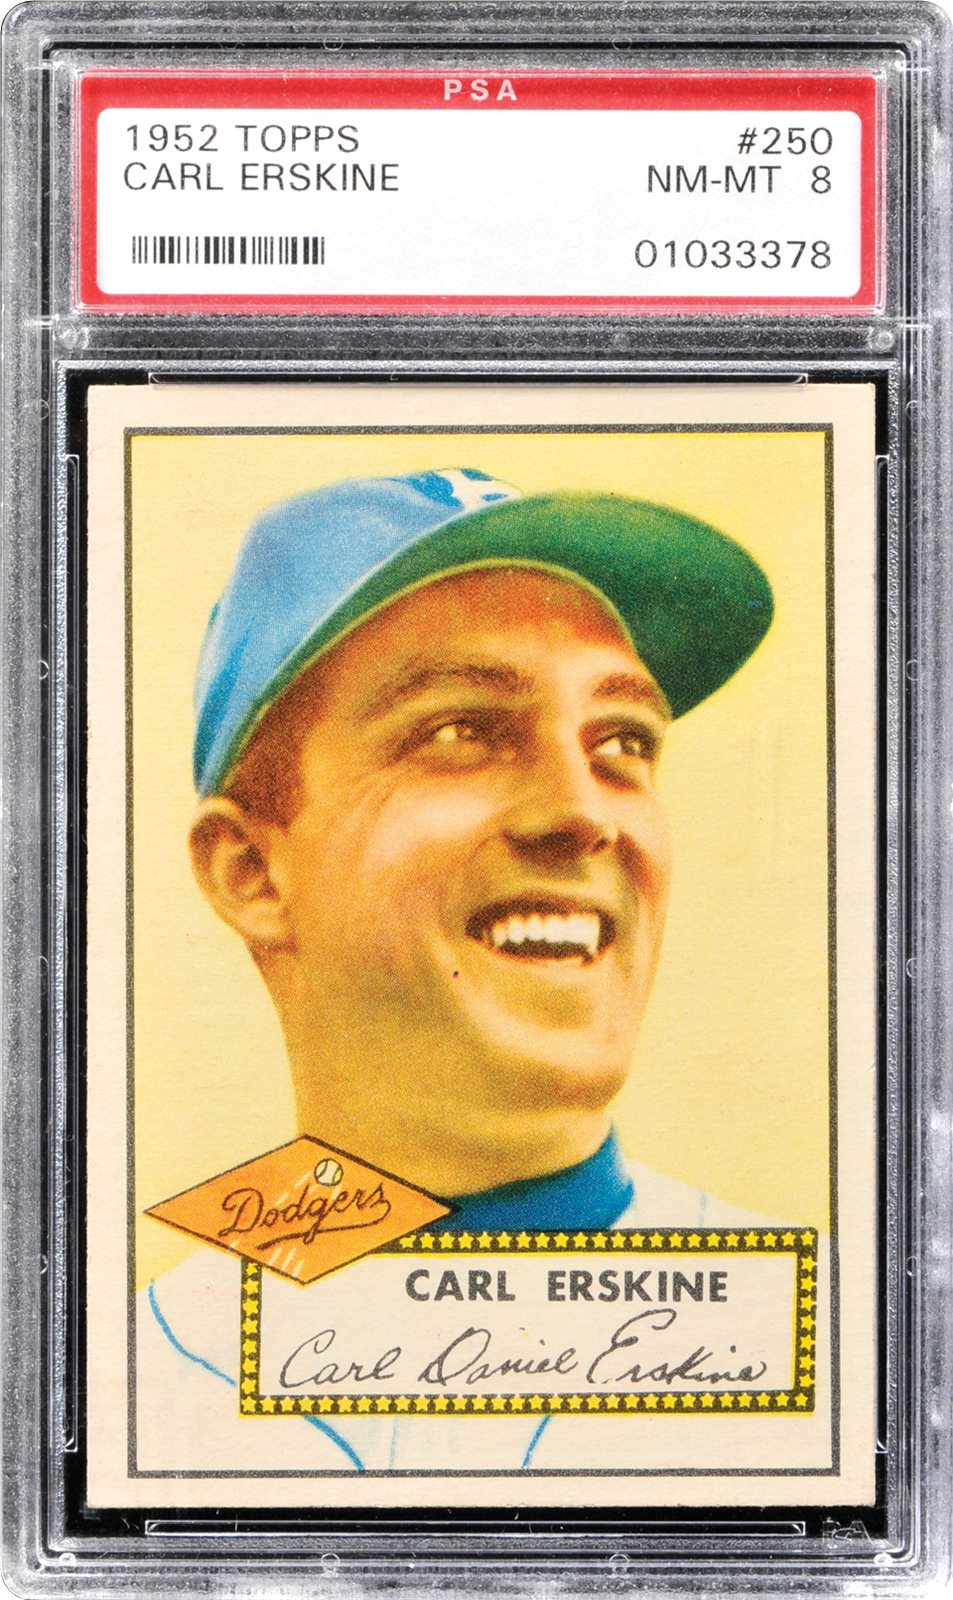 1952 Topps Carl Erskine PSA CardFacts™